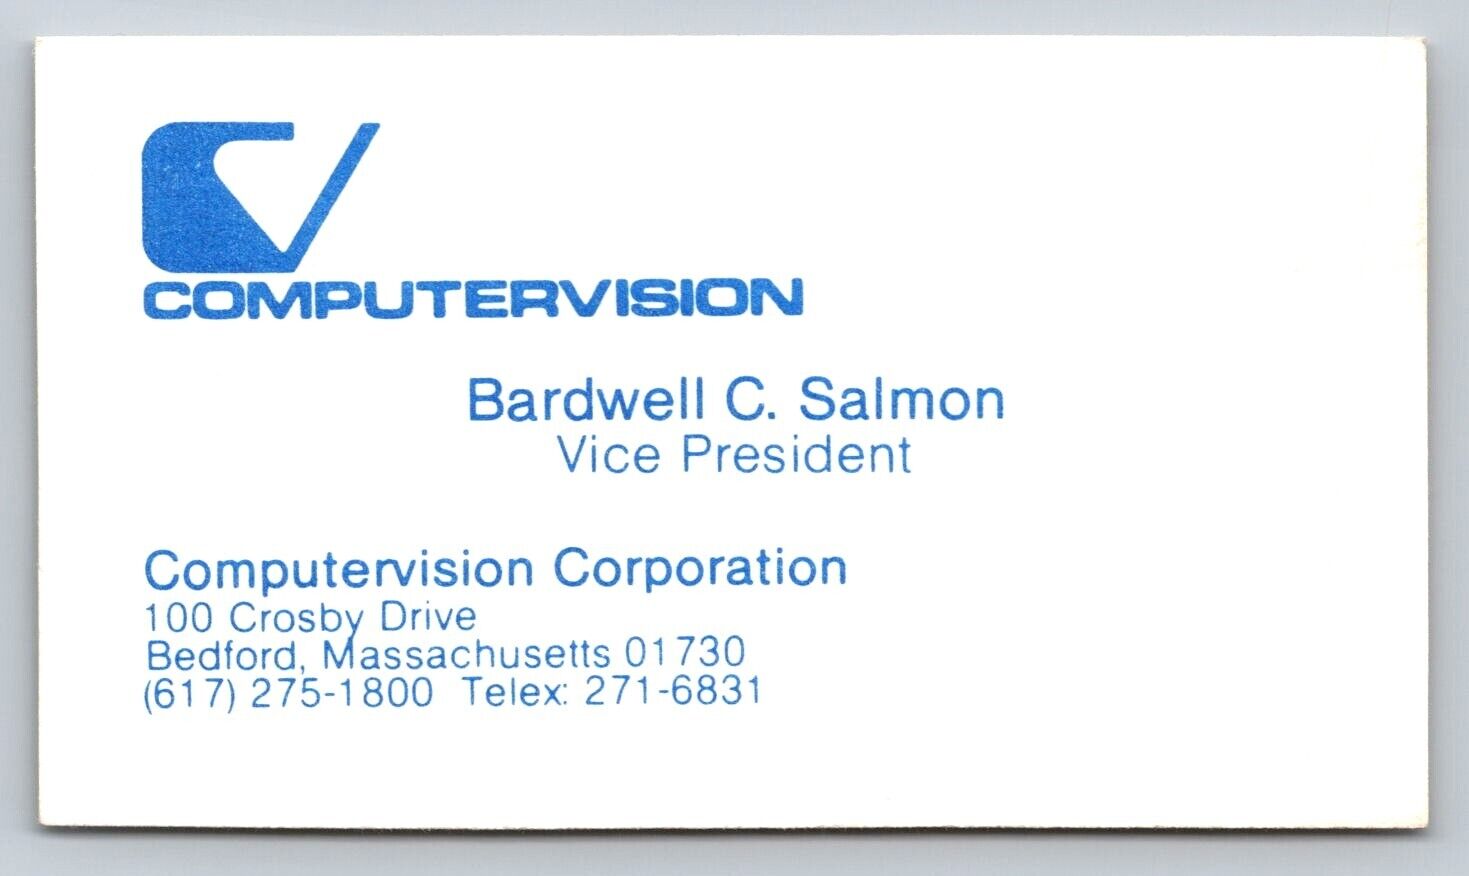 Vintage Business Card Computervision Computer Vision Bedford Massachusetts